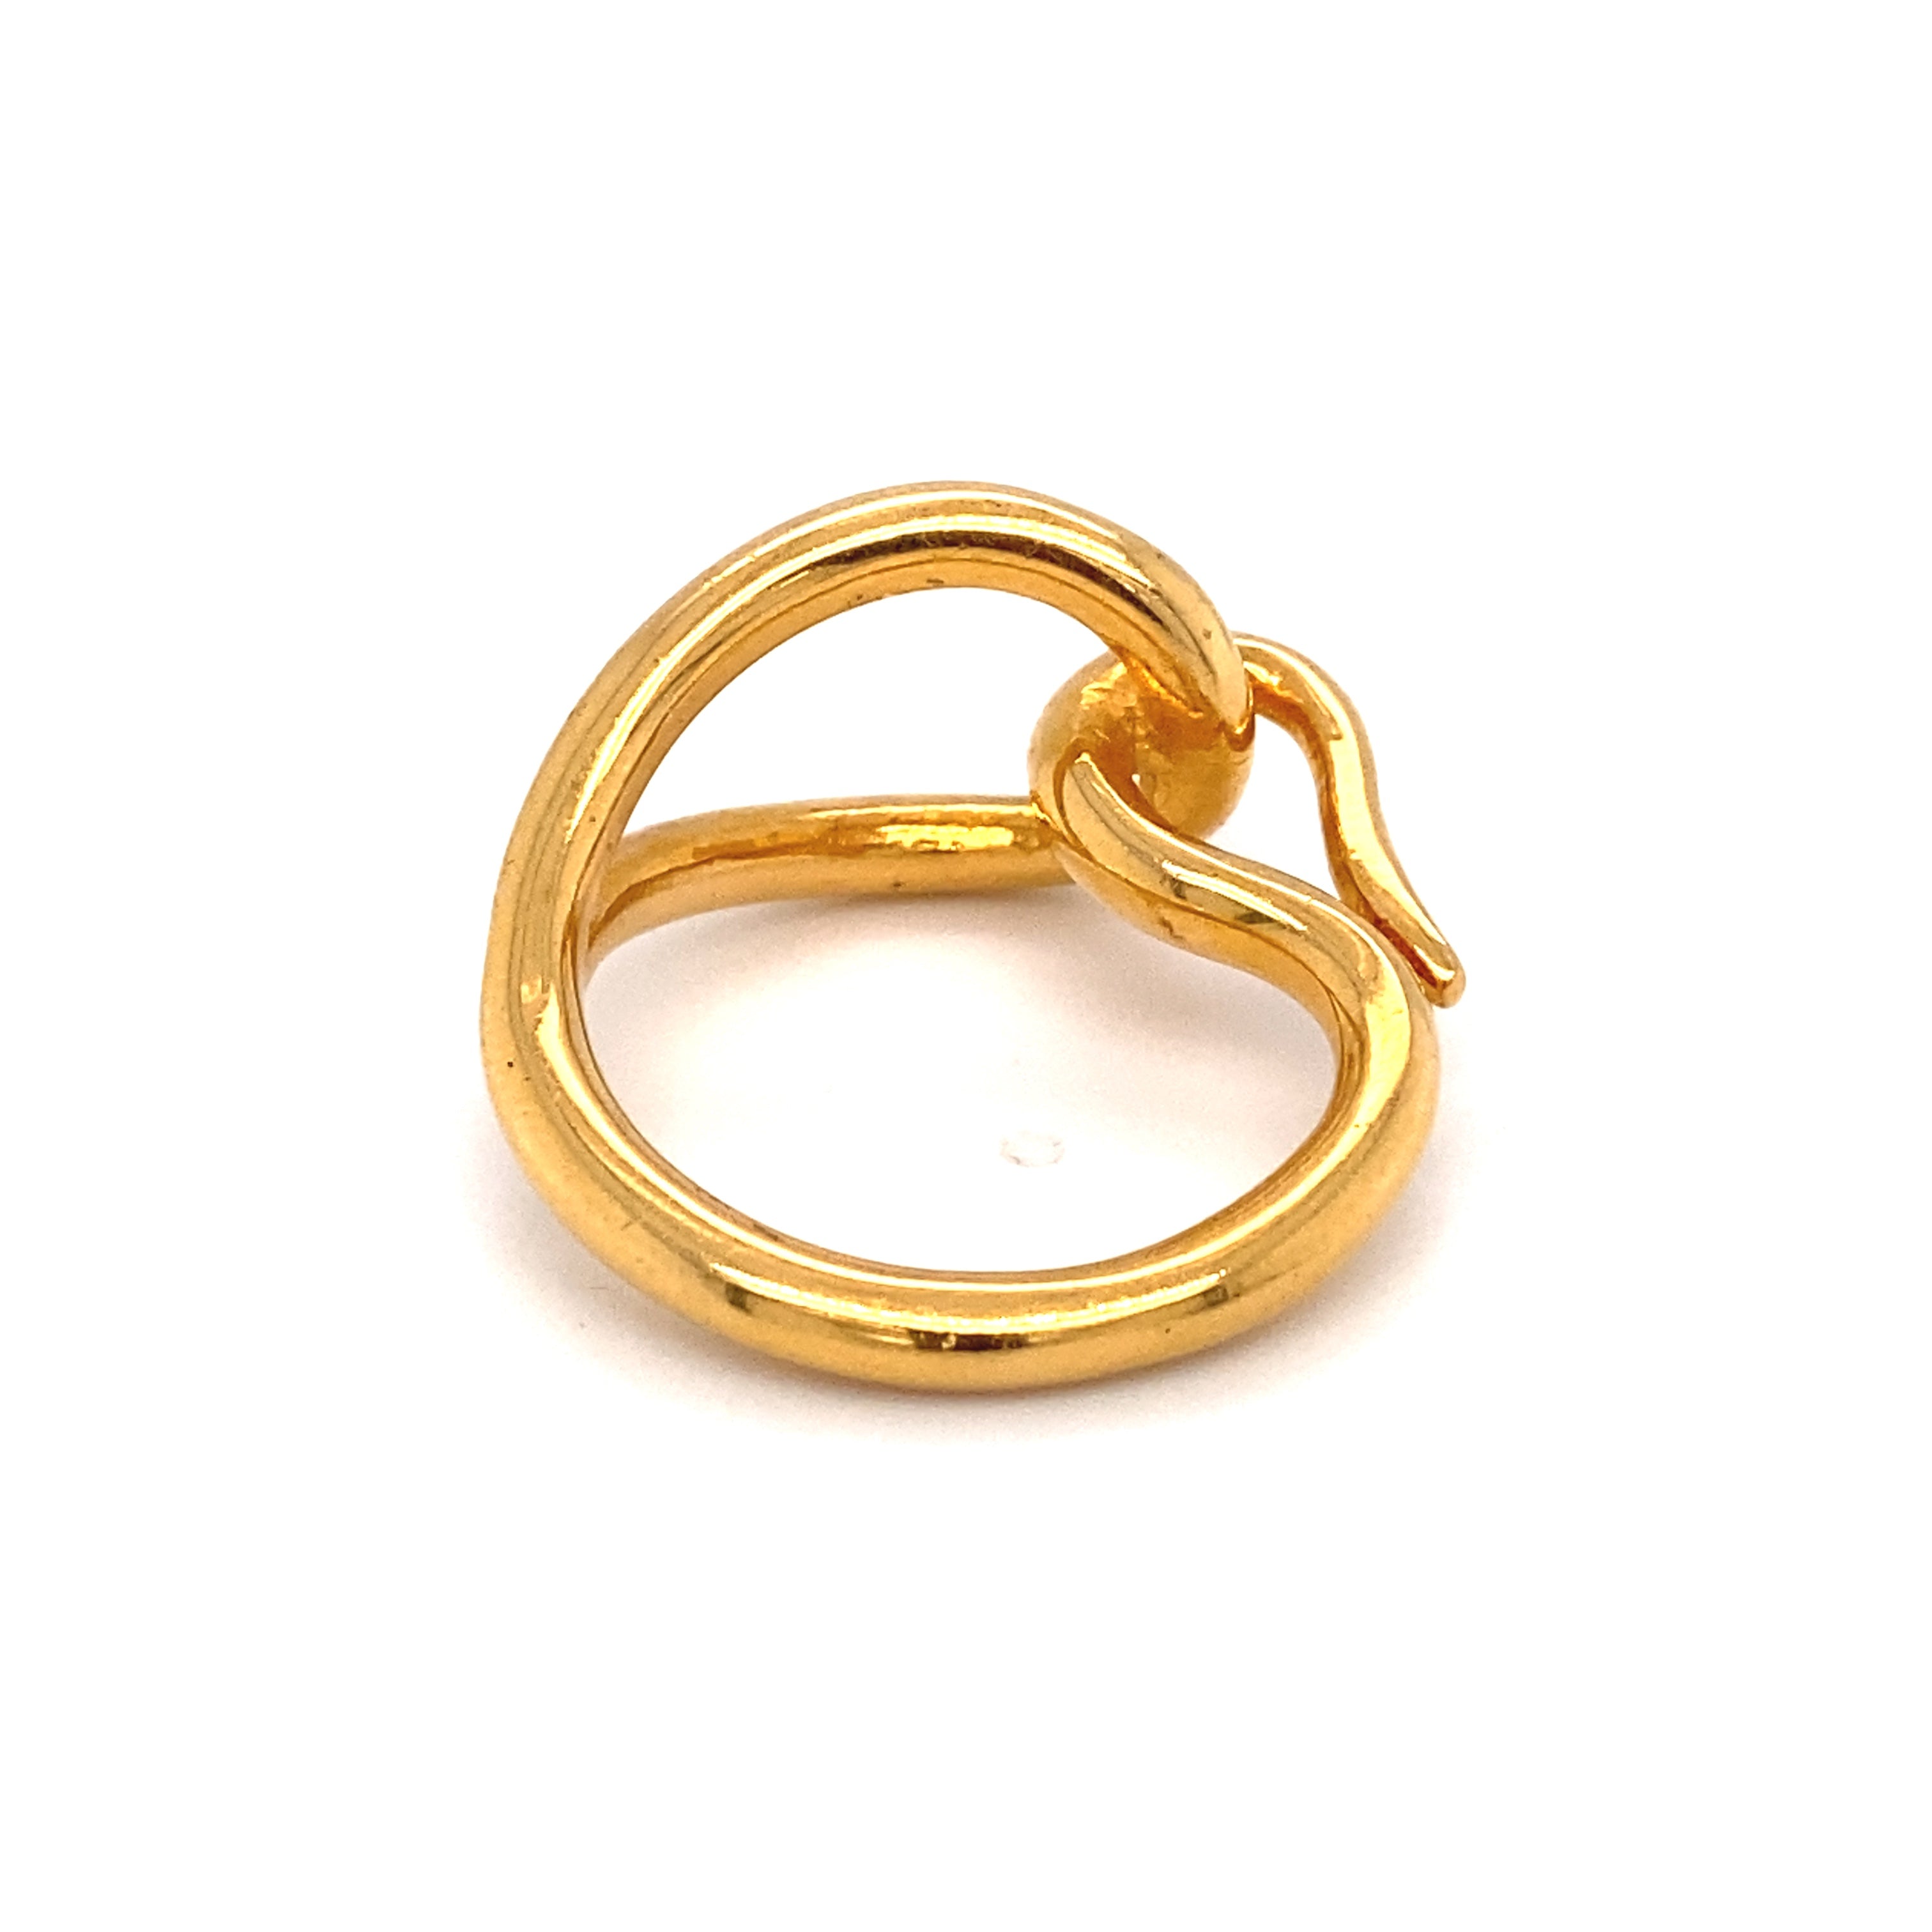 Hermes Gold-Tone Circle Scarf Ring - Vancouver Consignment Store